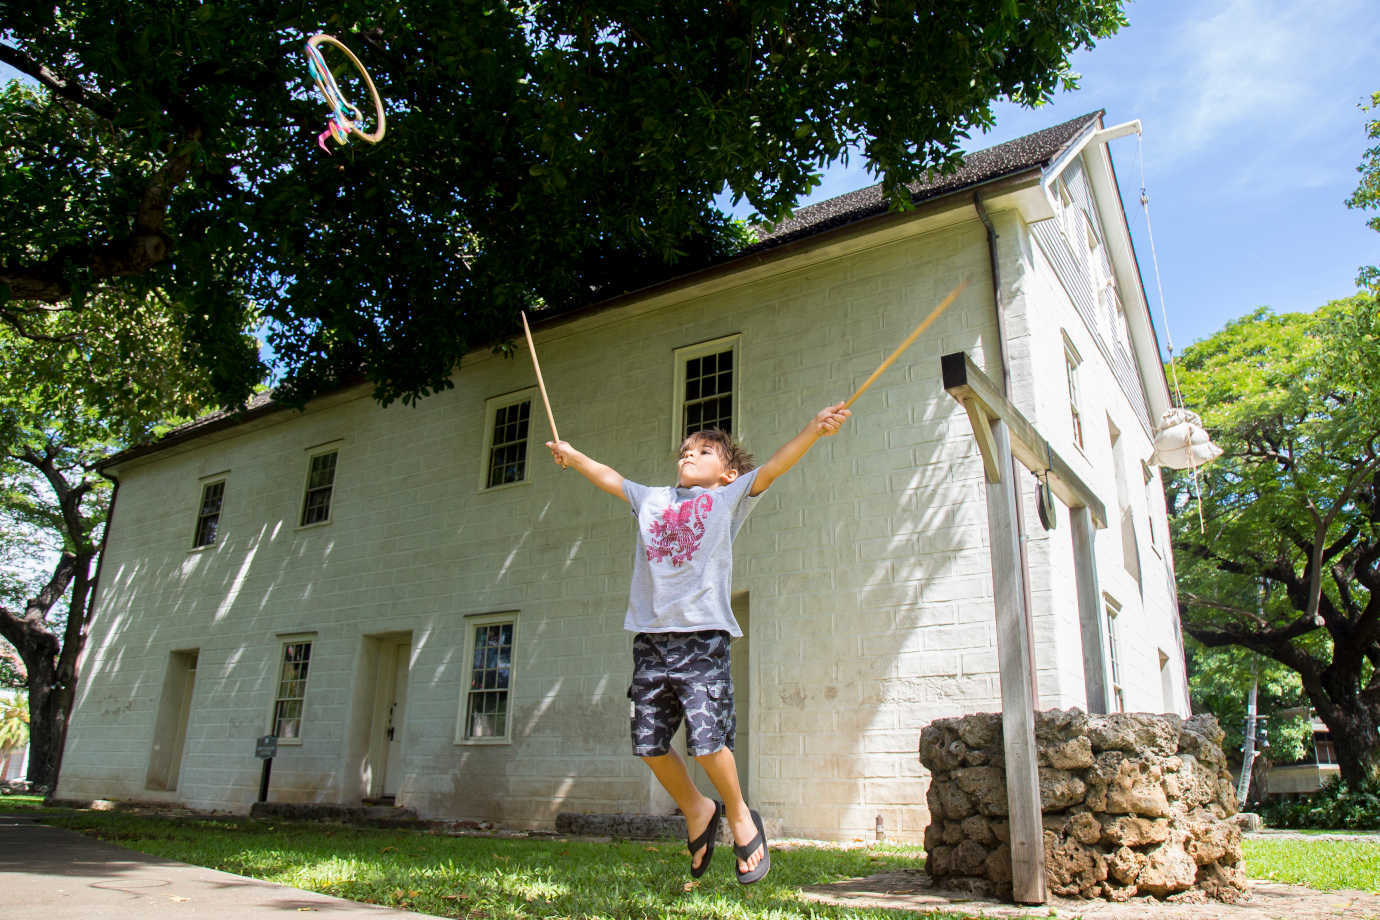 Visitors of all ages are welcome to the historic site. Image courtesy of HMH.